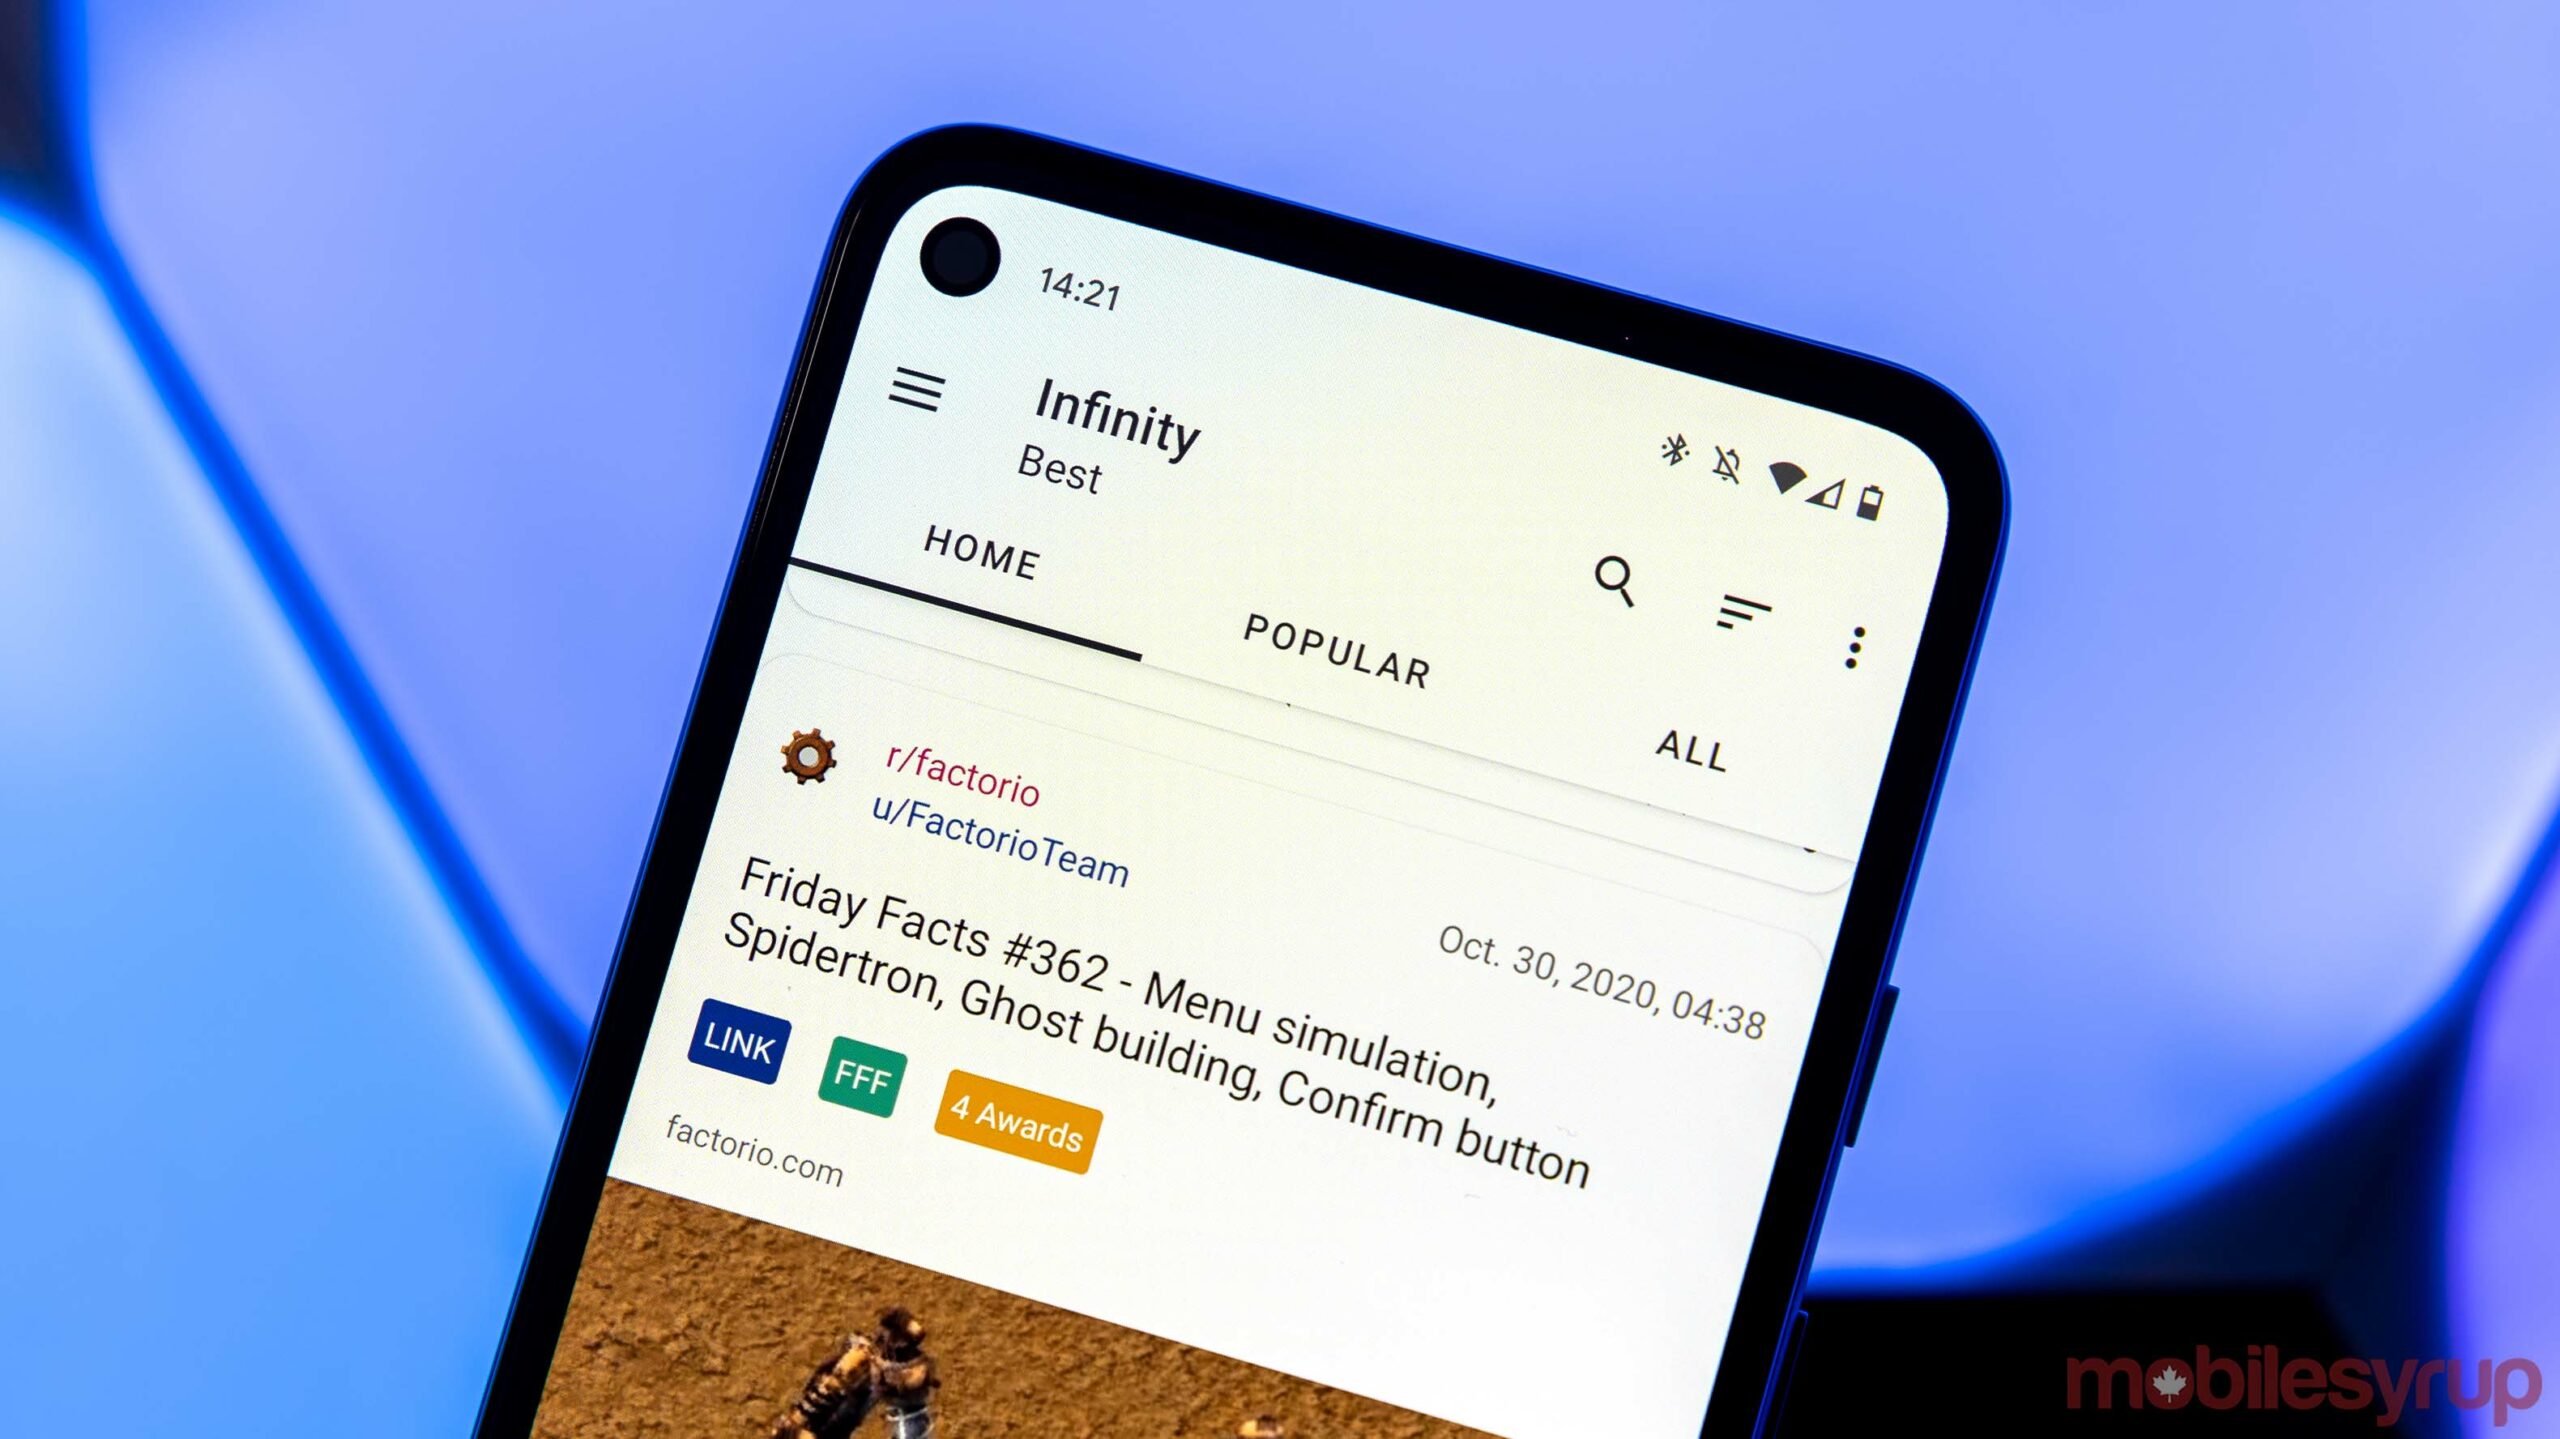 Infinity is a great open-source option for browsing Reddit on Android